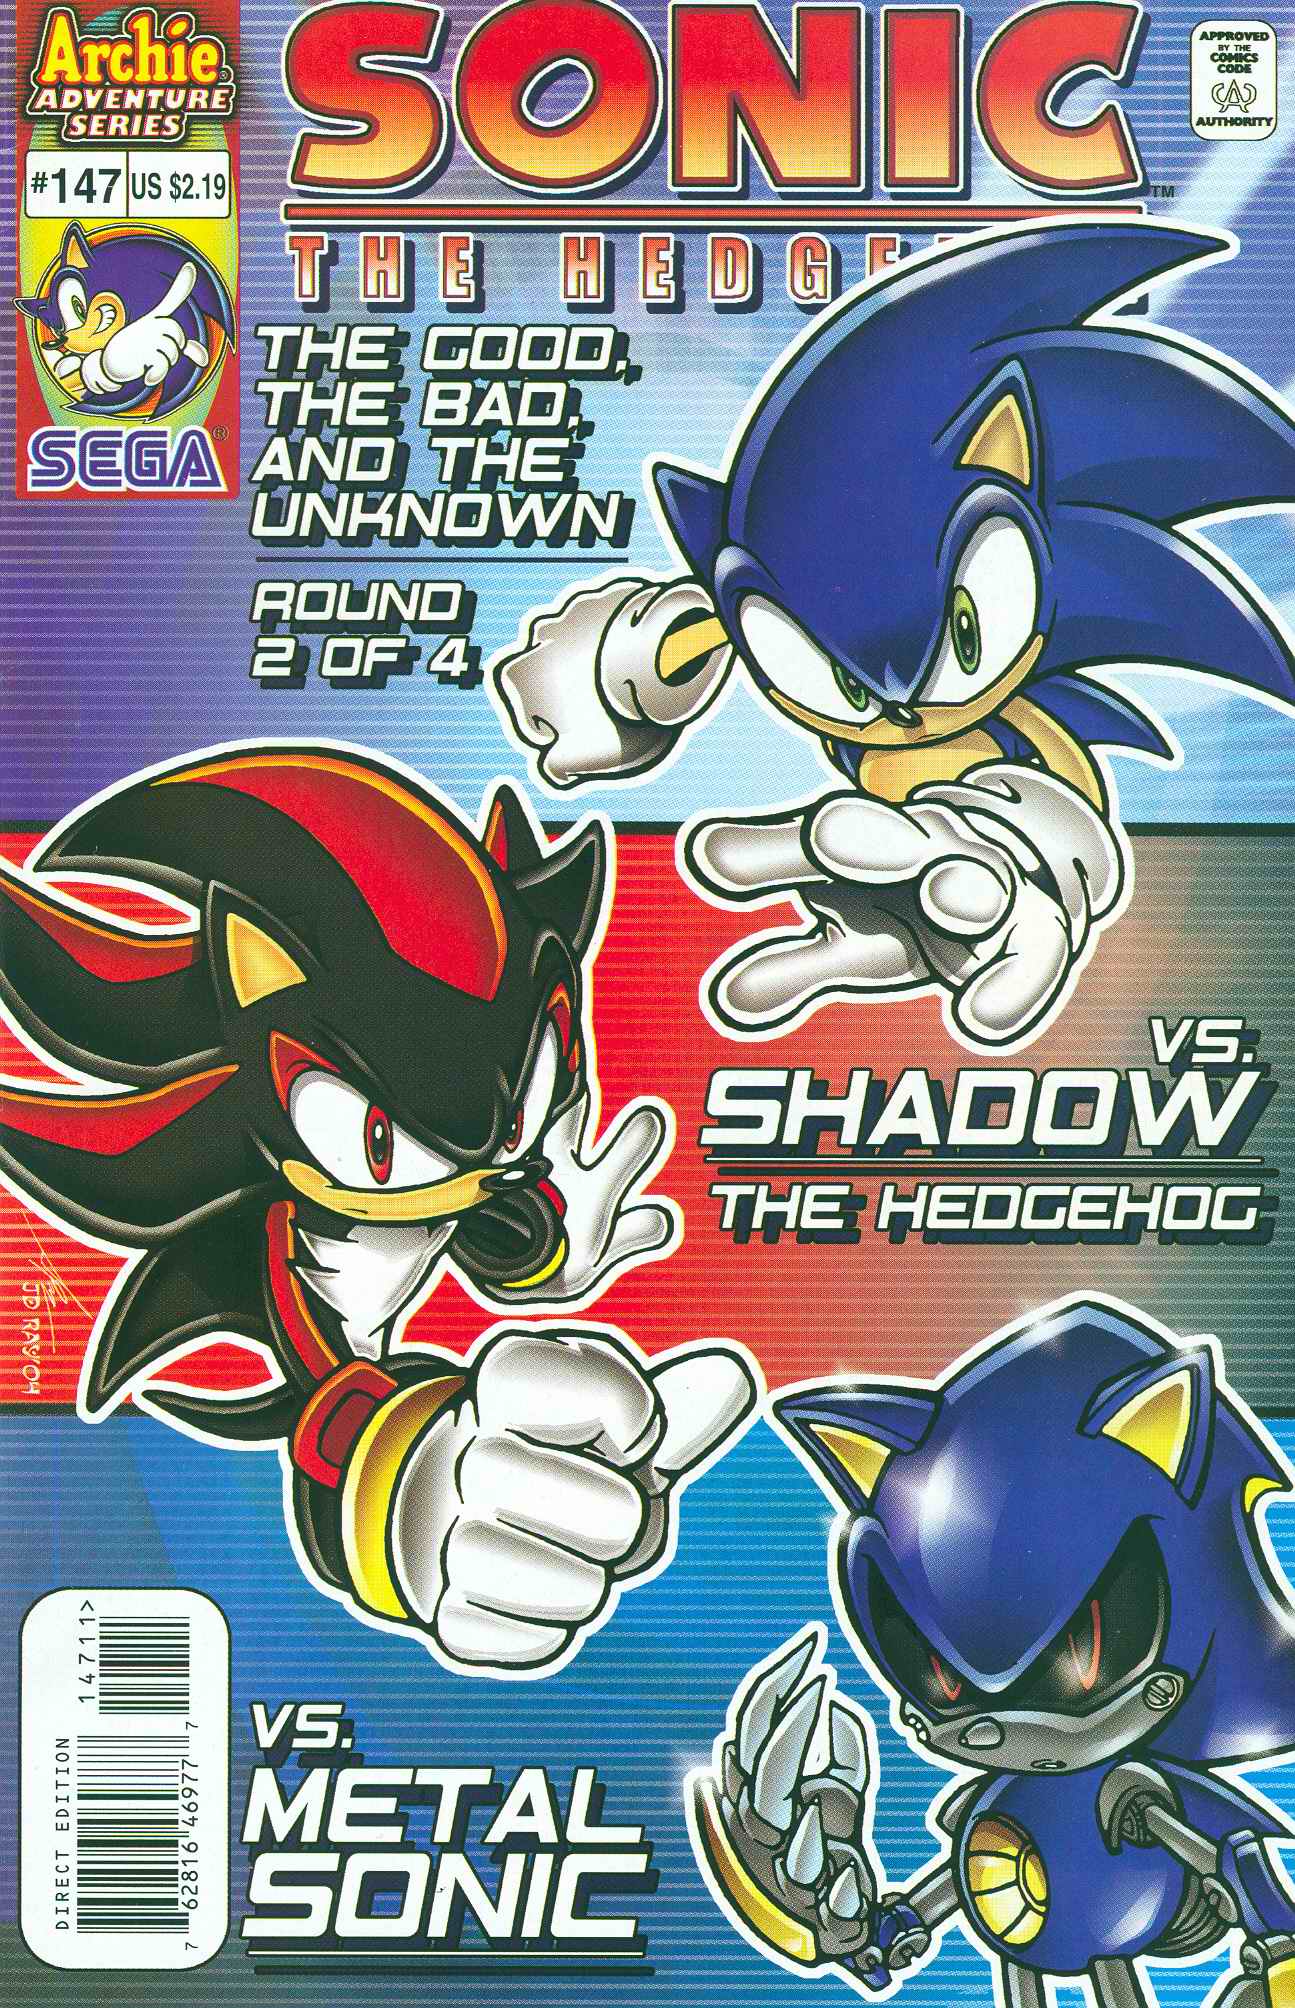 Sonic - Archie Adventure Series May 2005 Cover Page